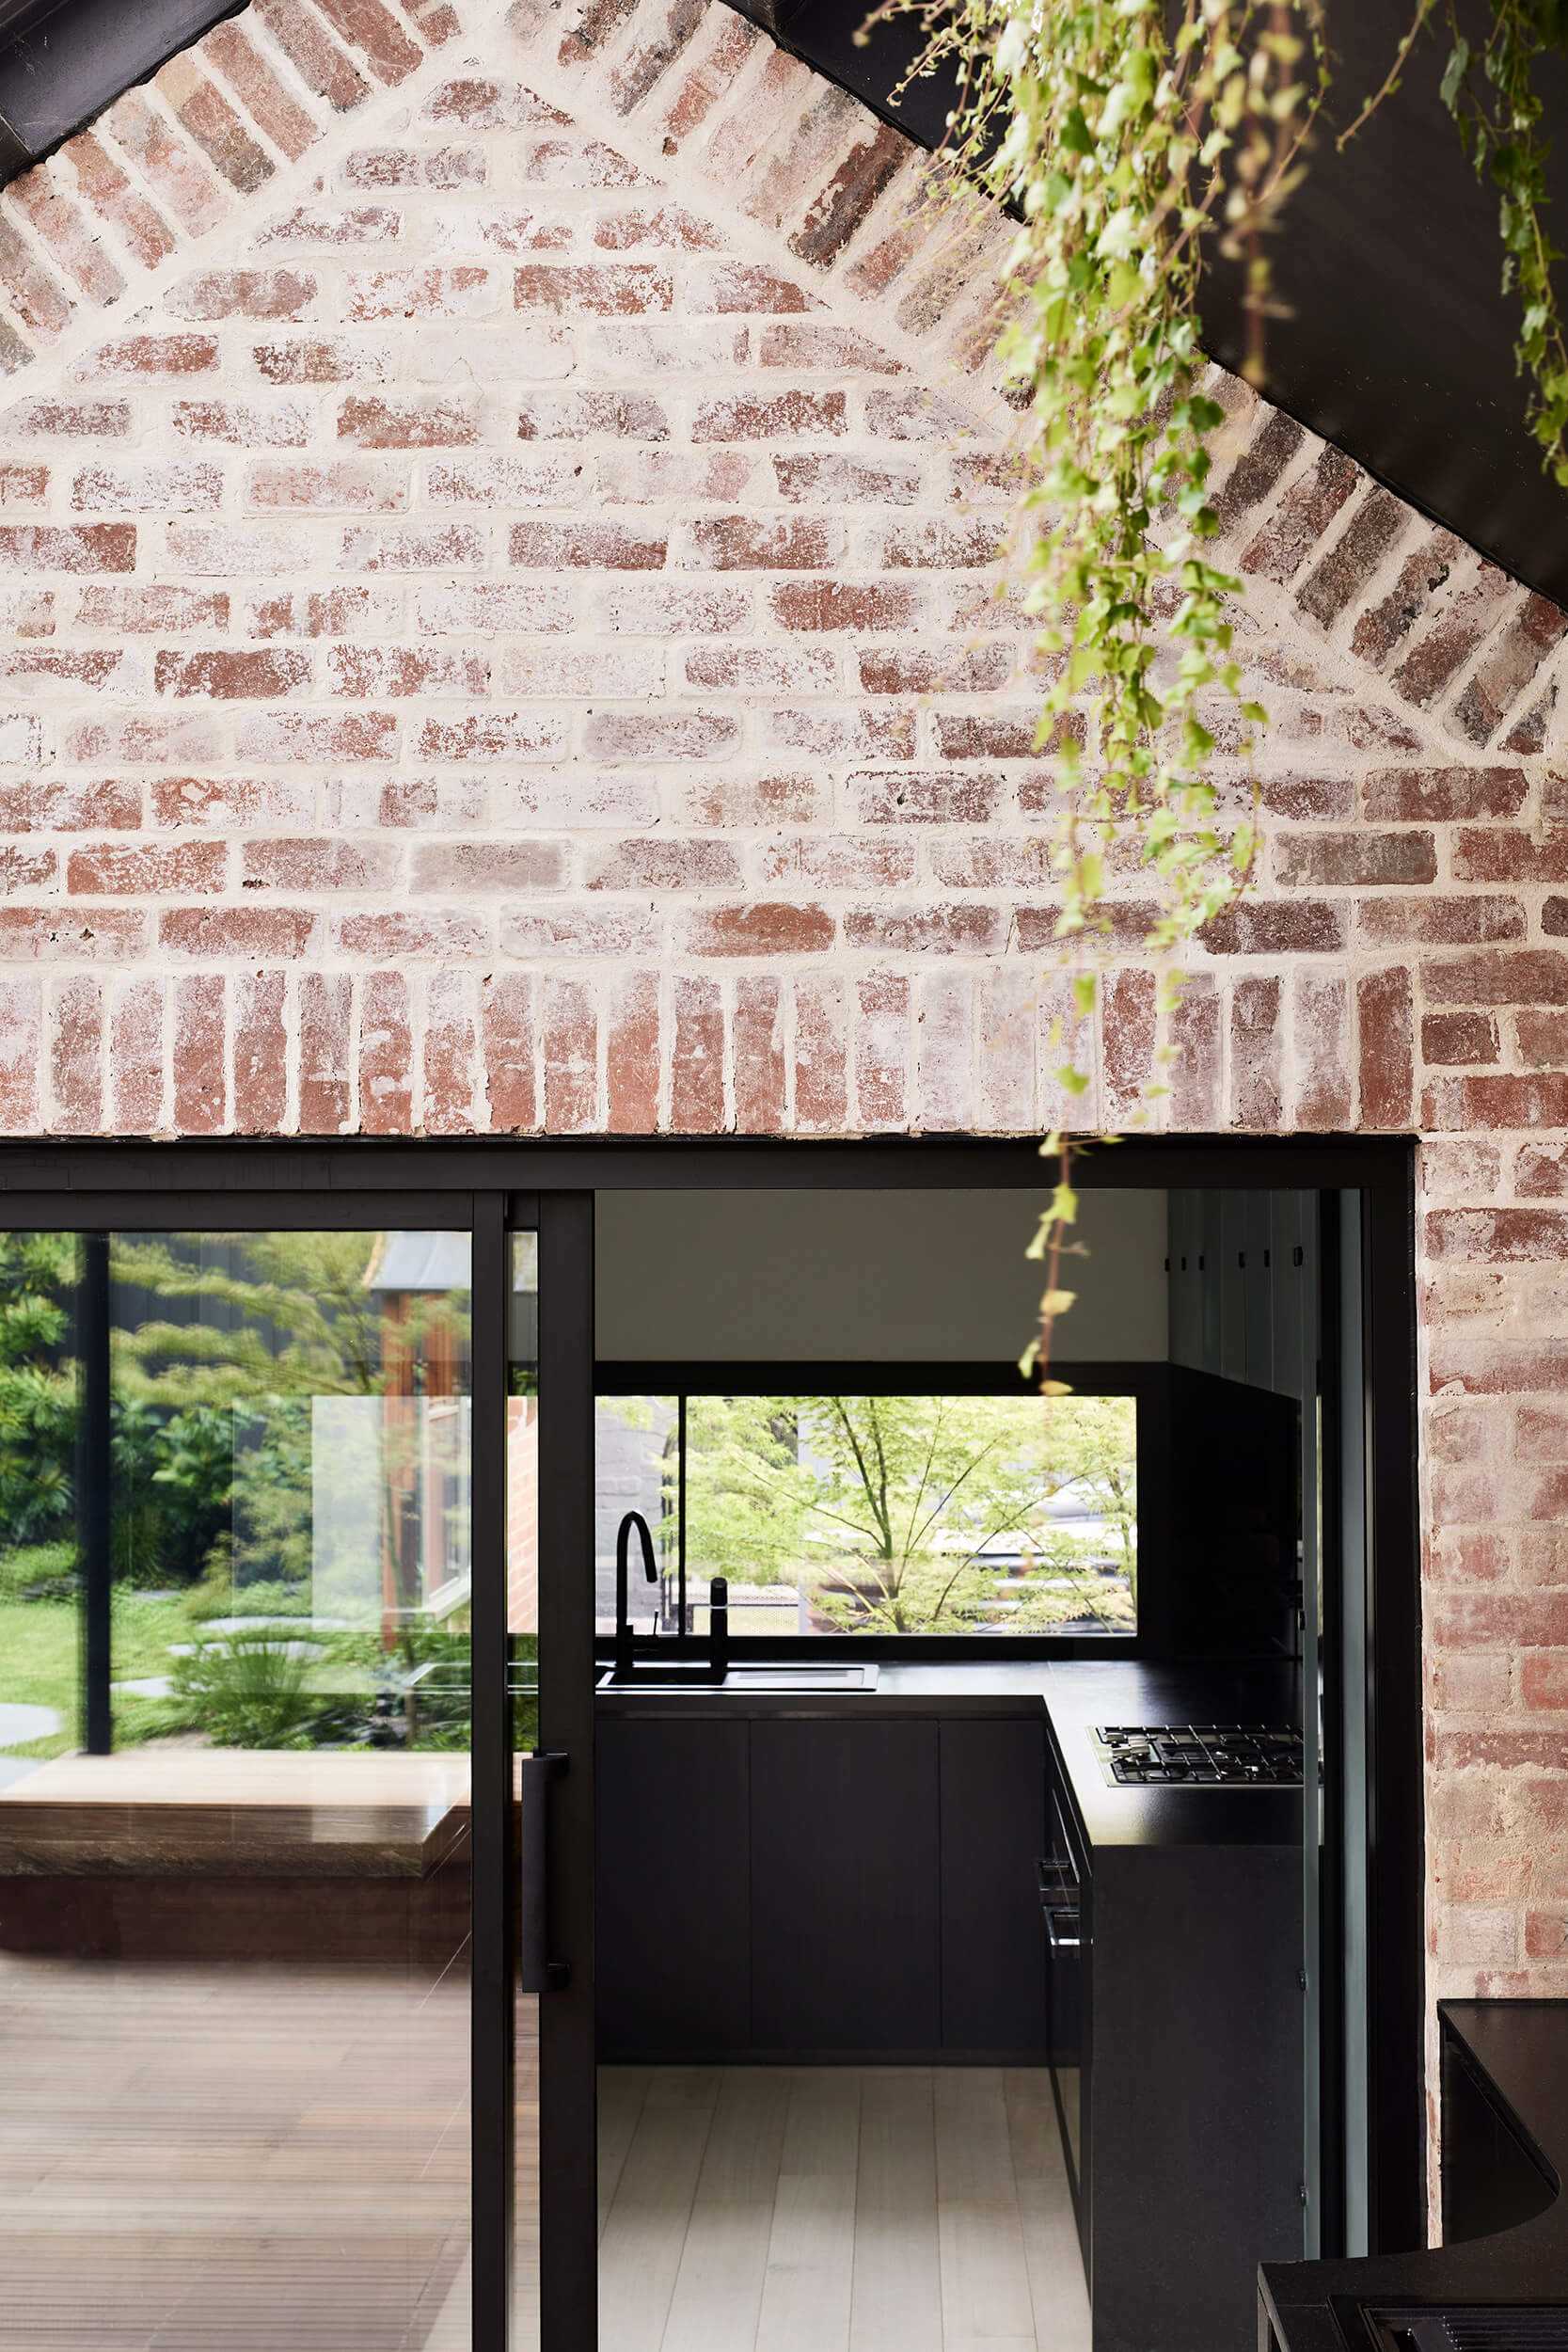 In the kitchen, dark cabinets, countertops, lighting, and painted brick wall, all assist in creating a bold appearance.